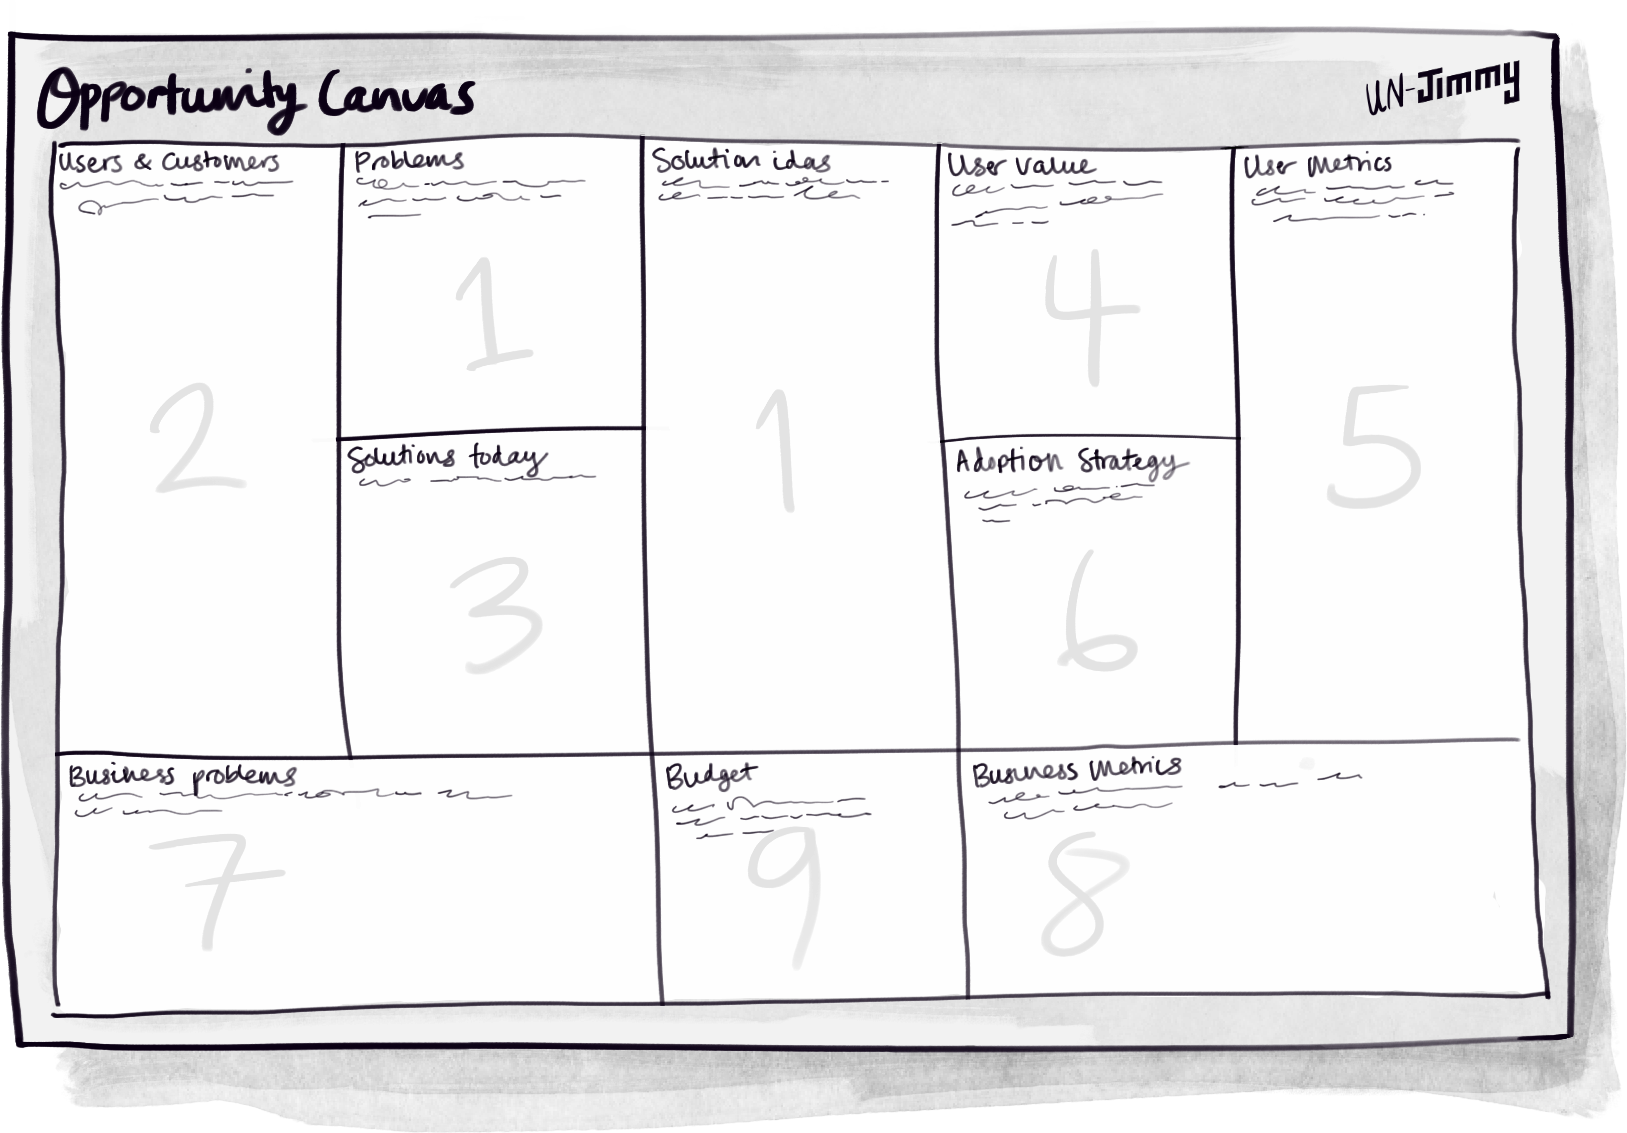 The Opportunity Canvas has nine sections on the page, they are: Problems, Users & customers, Solutions today, User value, User metrics, Adoption strategy, Business problems, Business metrics, and Budget.